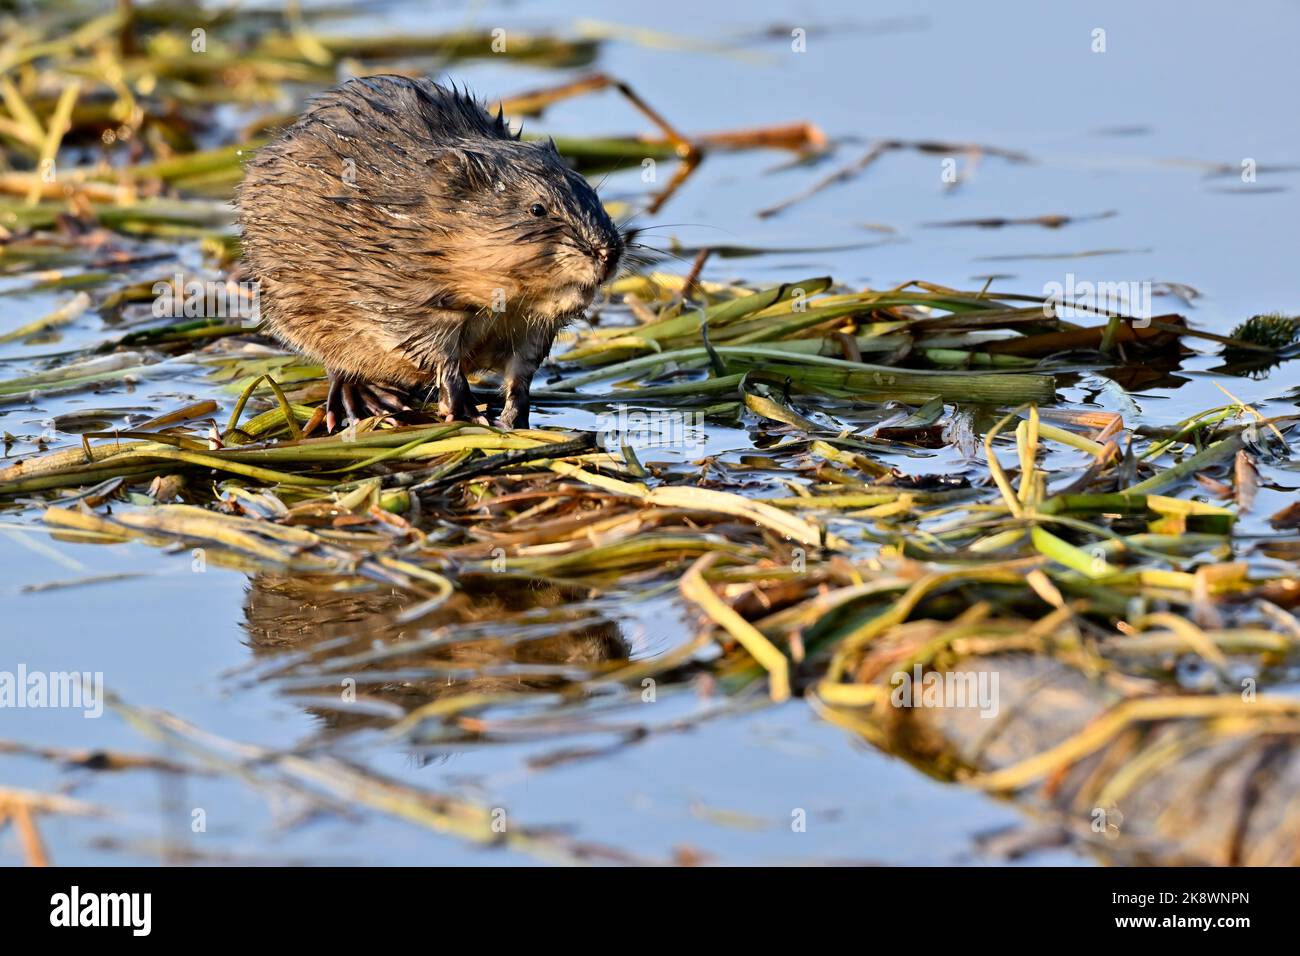 A wild Muskrat 'Ondatra zibethicus', sitting on a log in a marshy area in rural Alberta Canada. Stock Photo